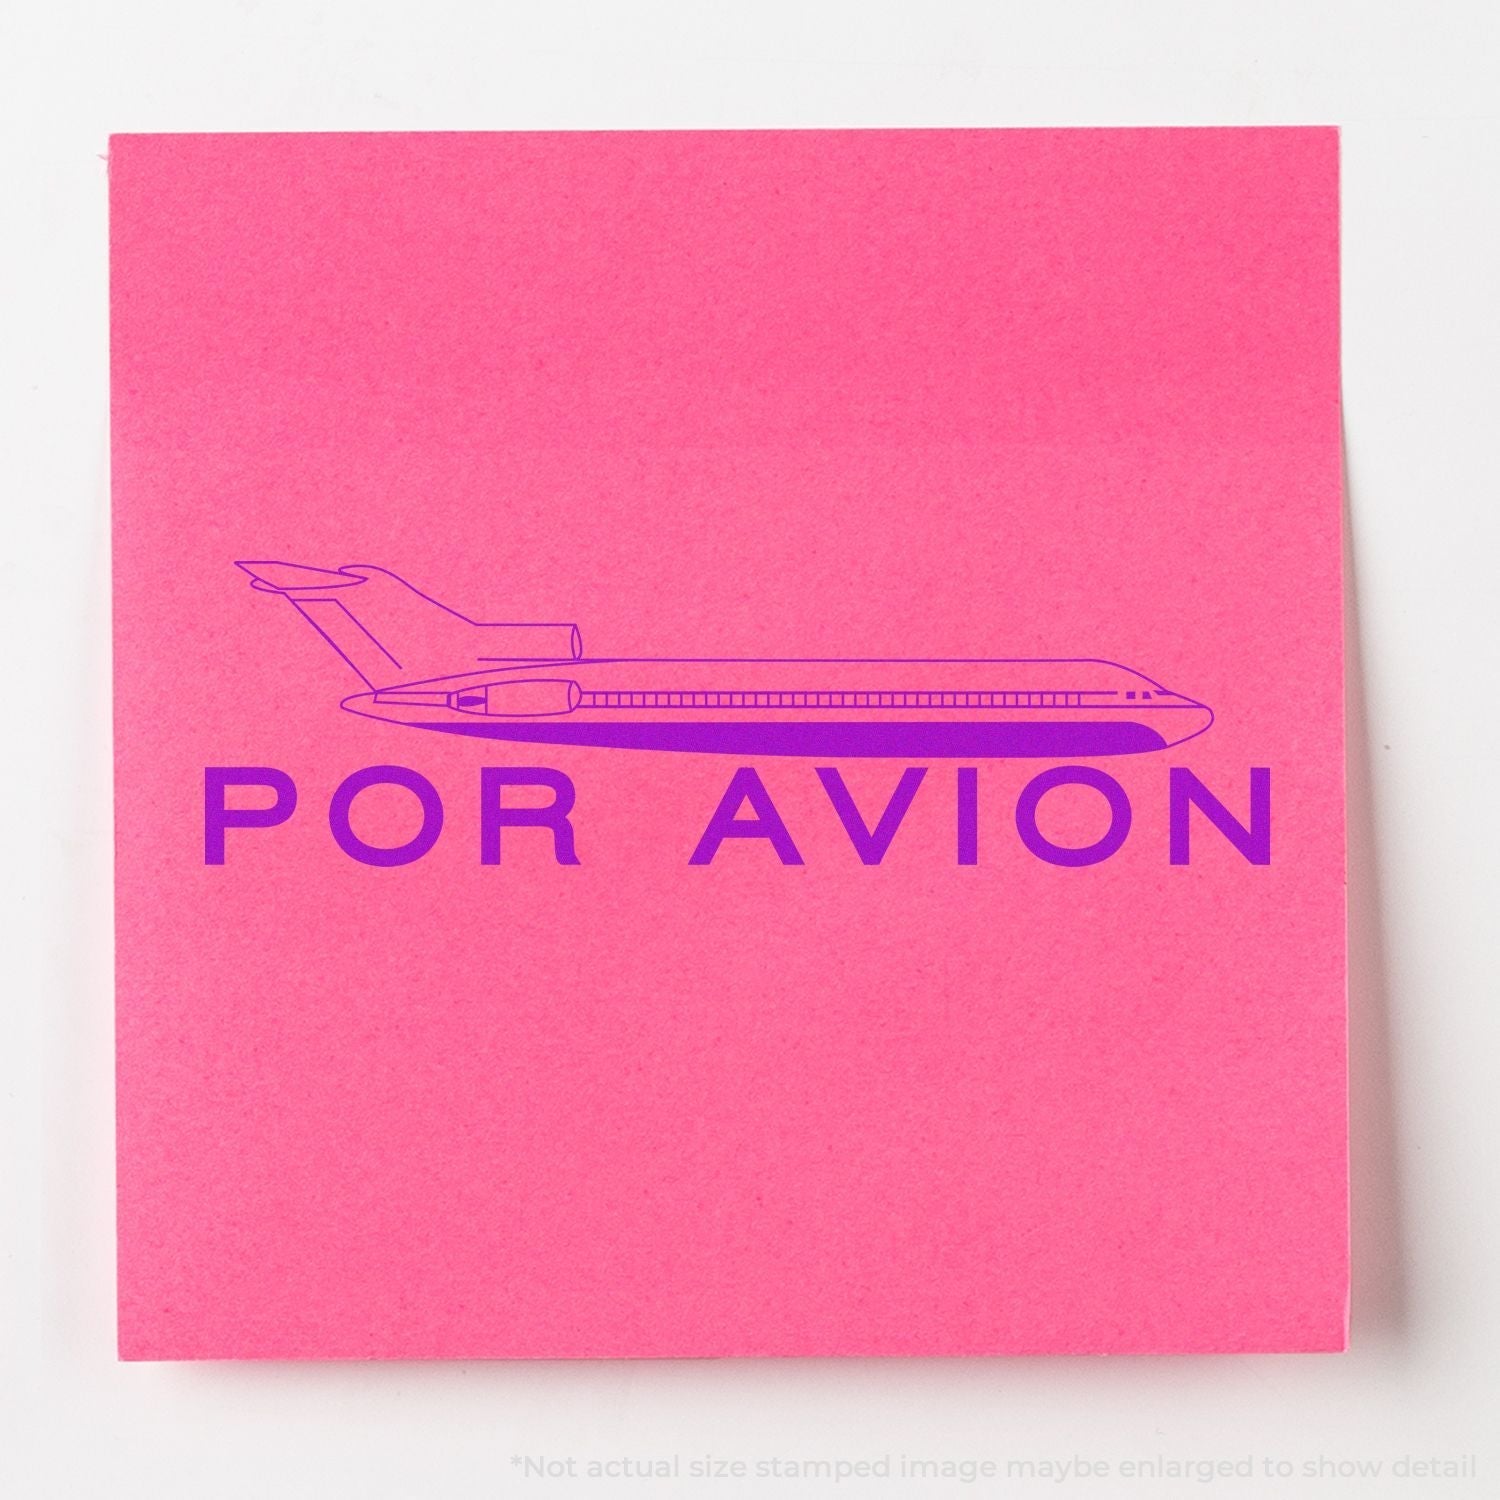 A self-inking stamp with a stamped image showing how the text "POR AVION" with an icon of an airplane above the text is displayed after stamping.